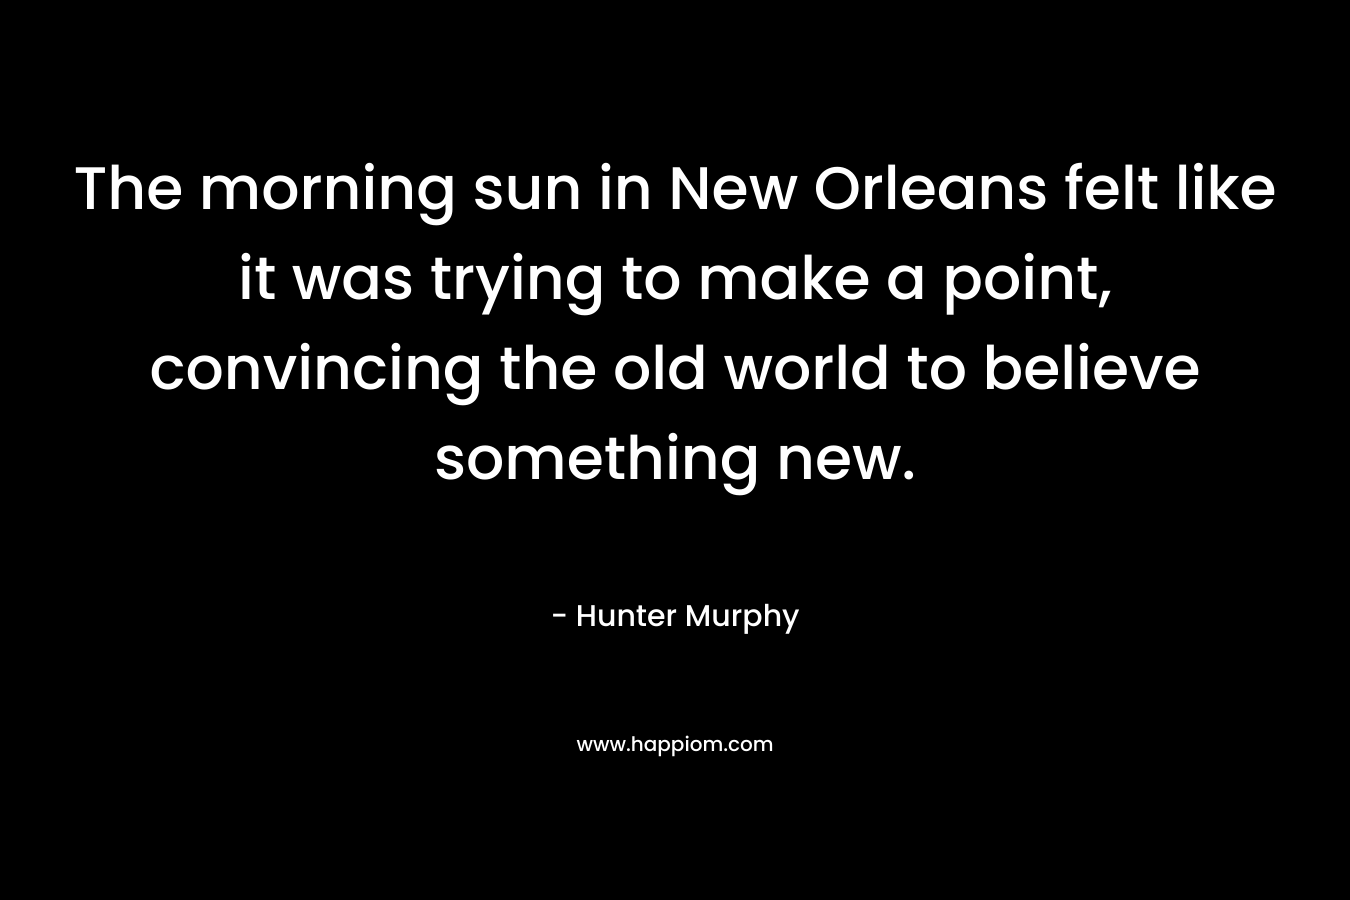 The morning sun in New Orleans felt like it was trying to make a point, convincing the old world to believe something new.